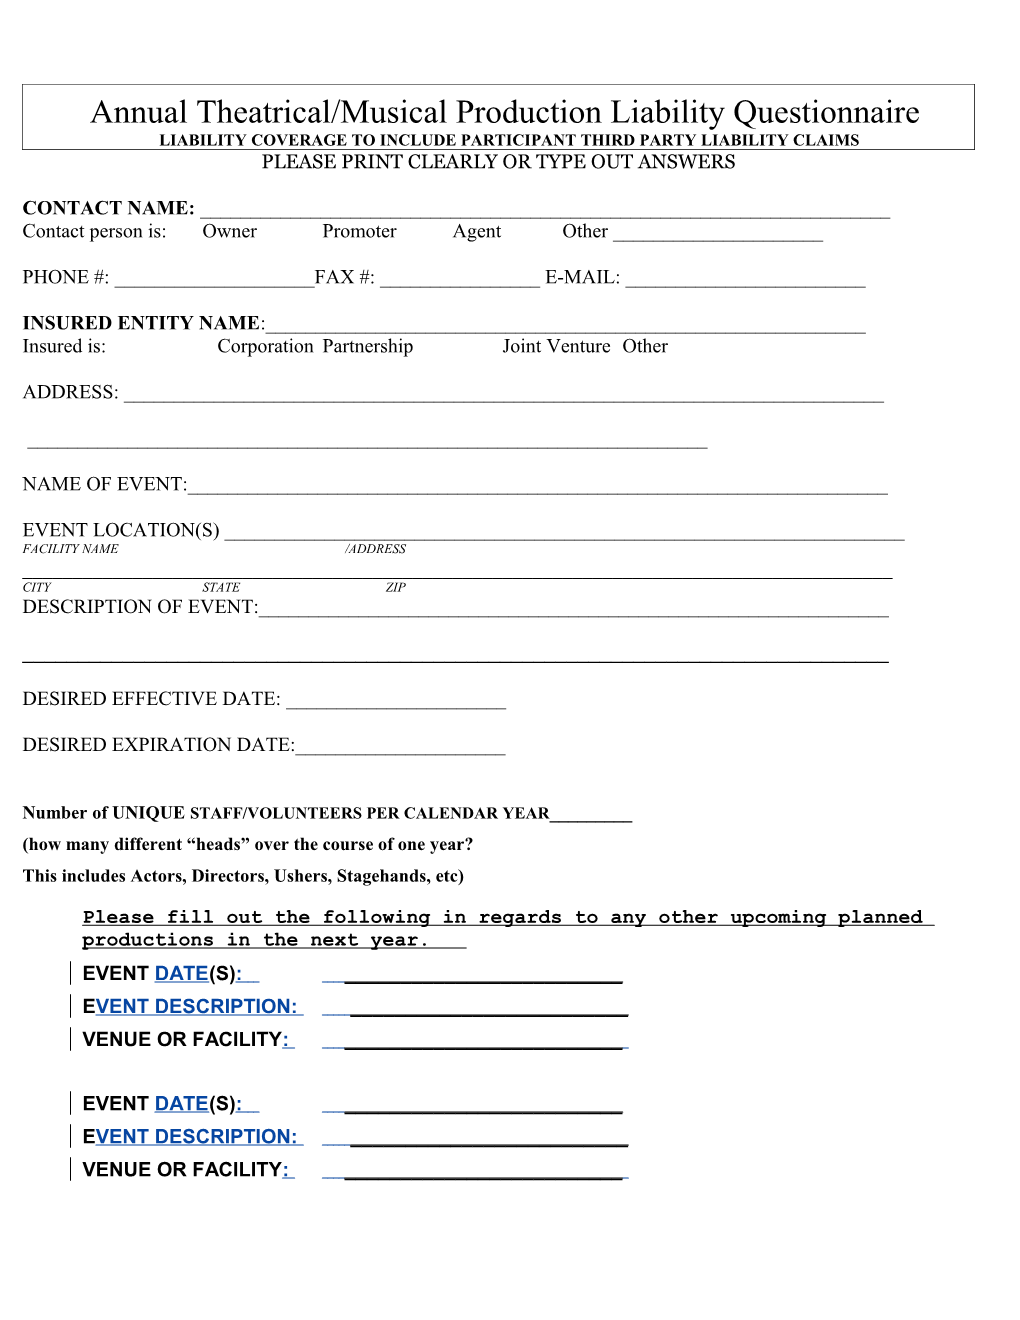 Sporting Event Liability Questionnaire